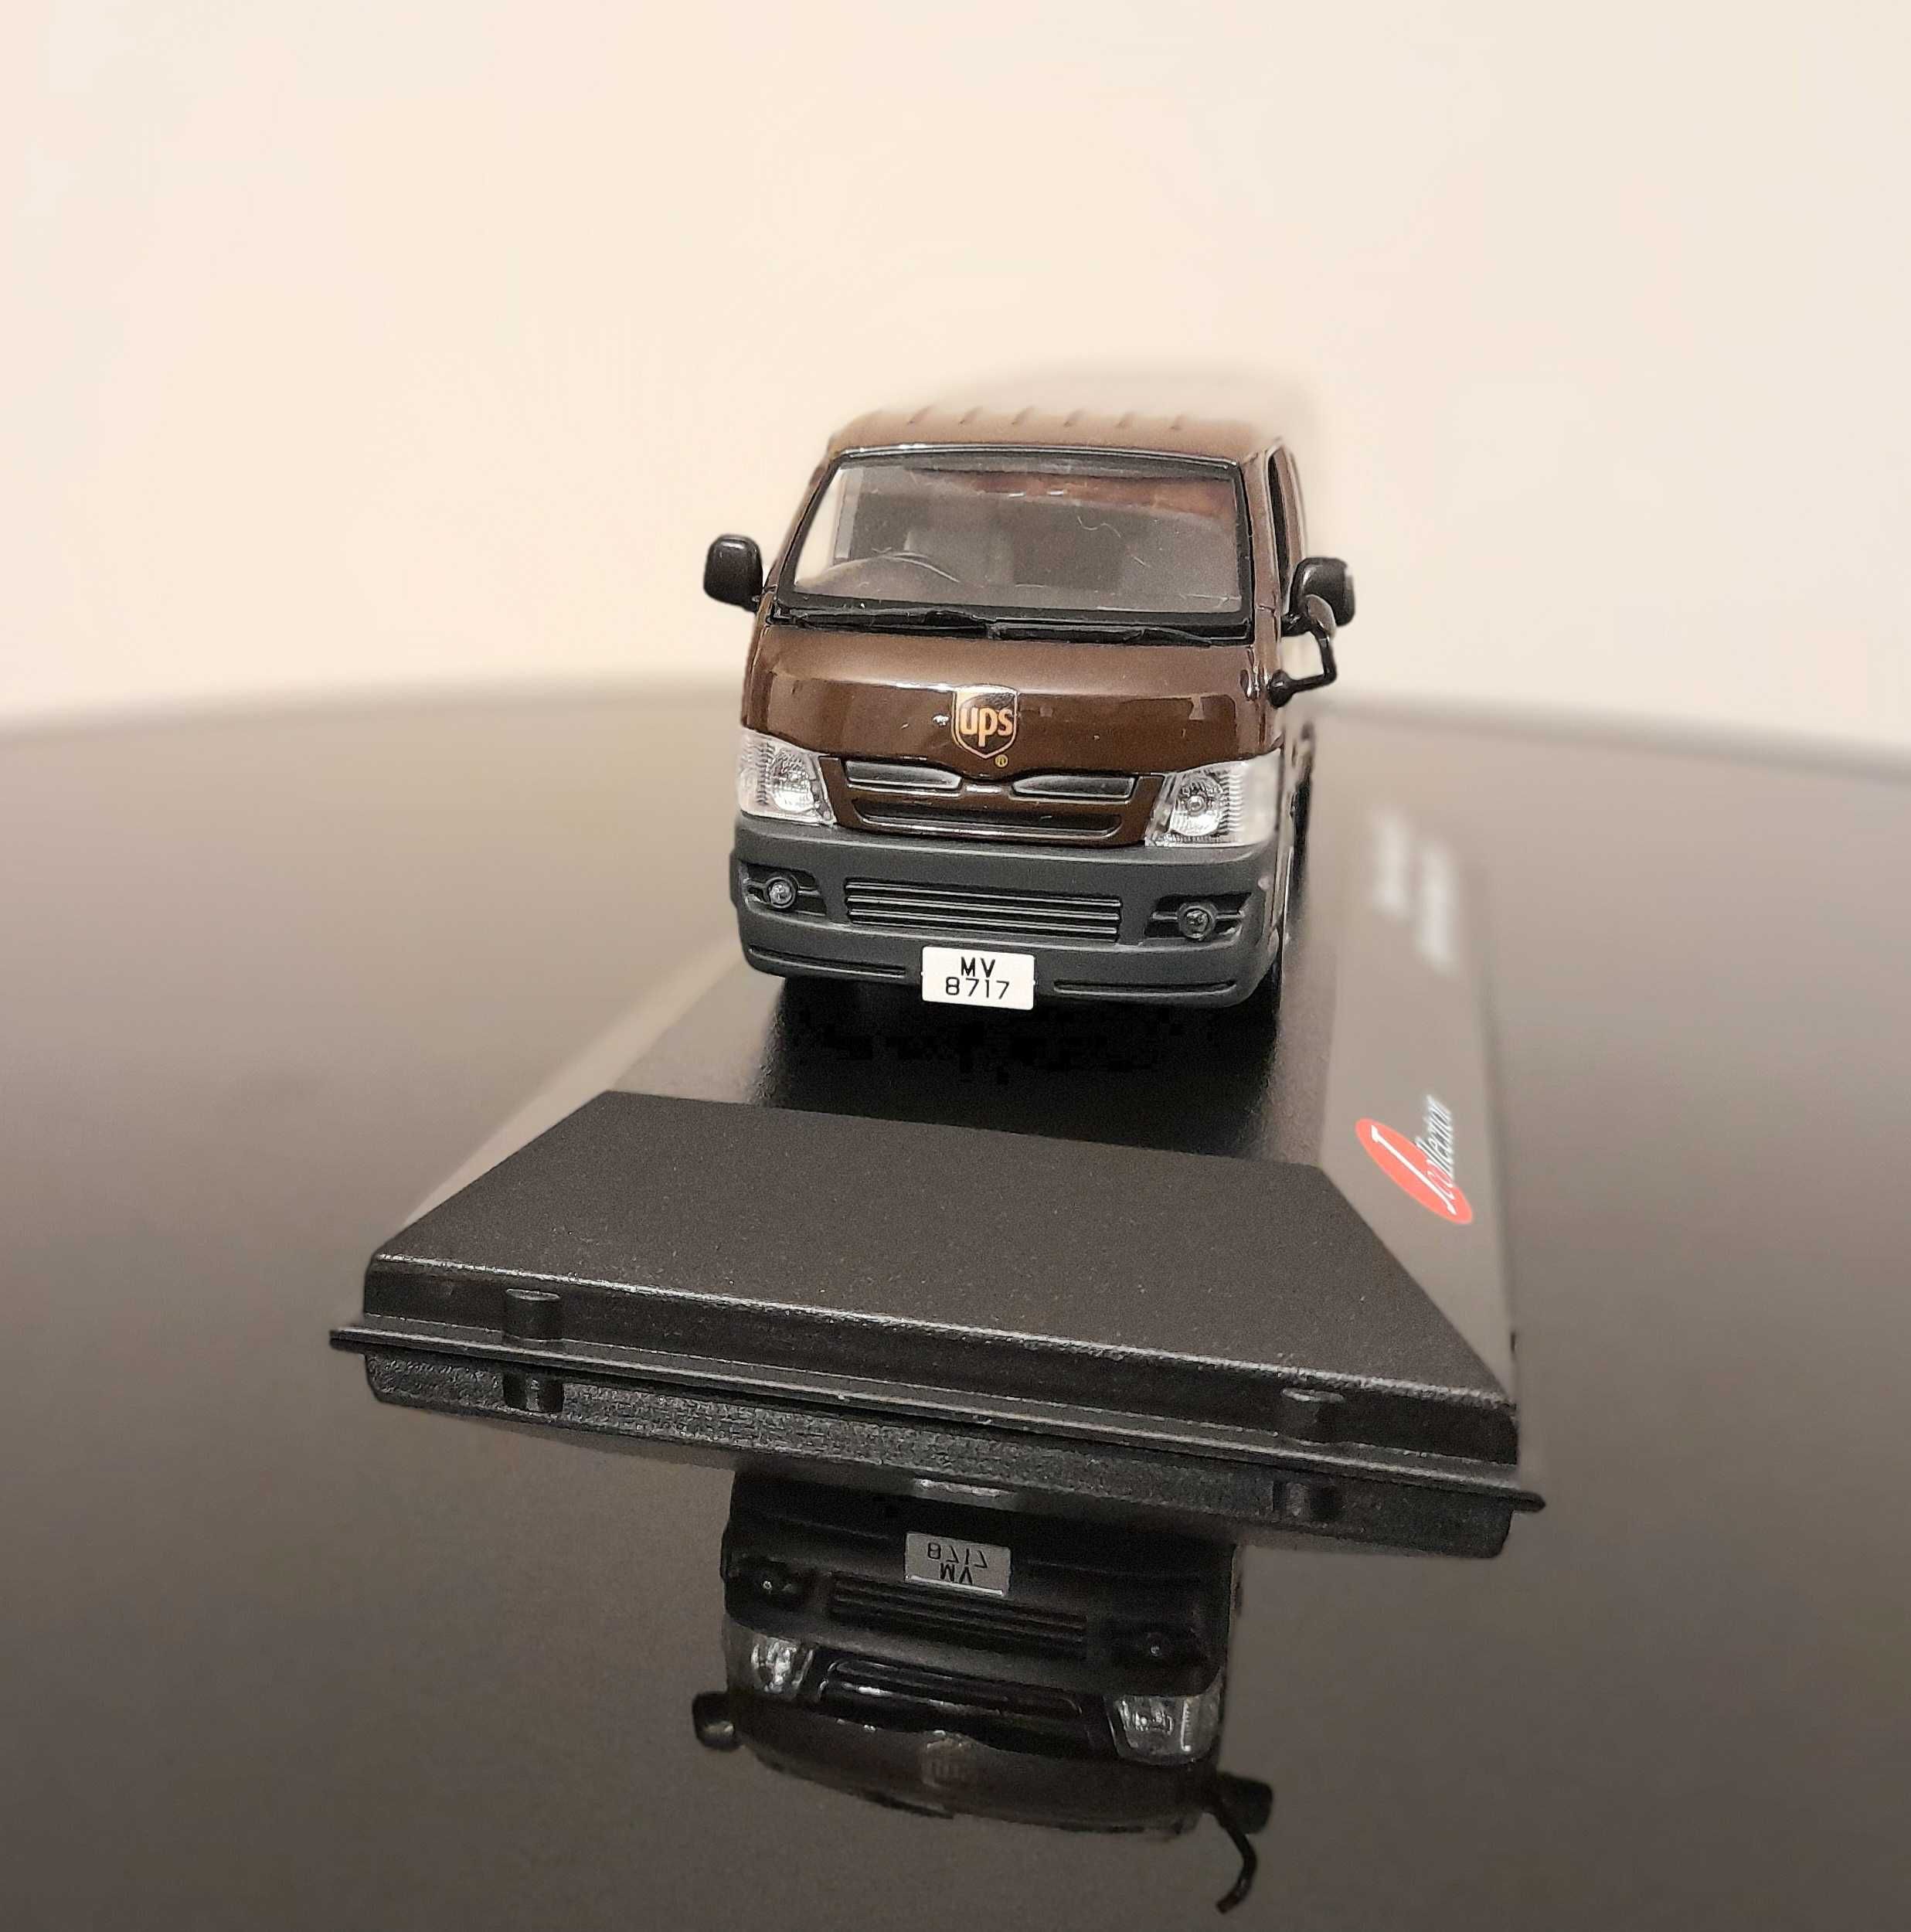 Toyota Hiace 2007 UPS HK Delivery Van 1:43 J-Collection